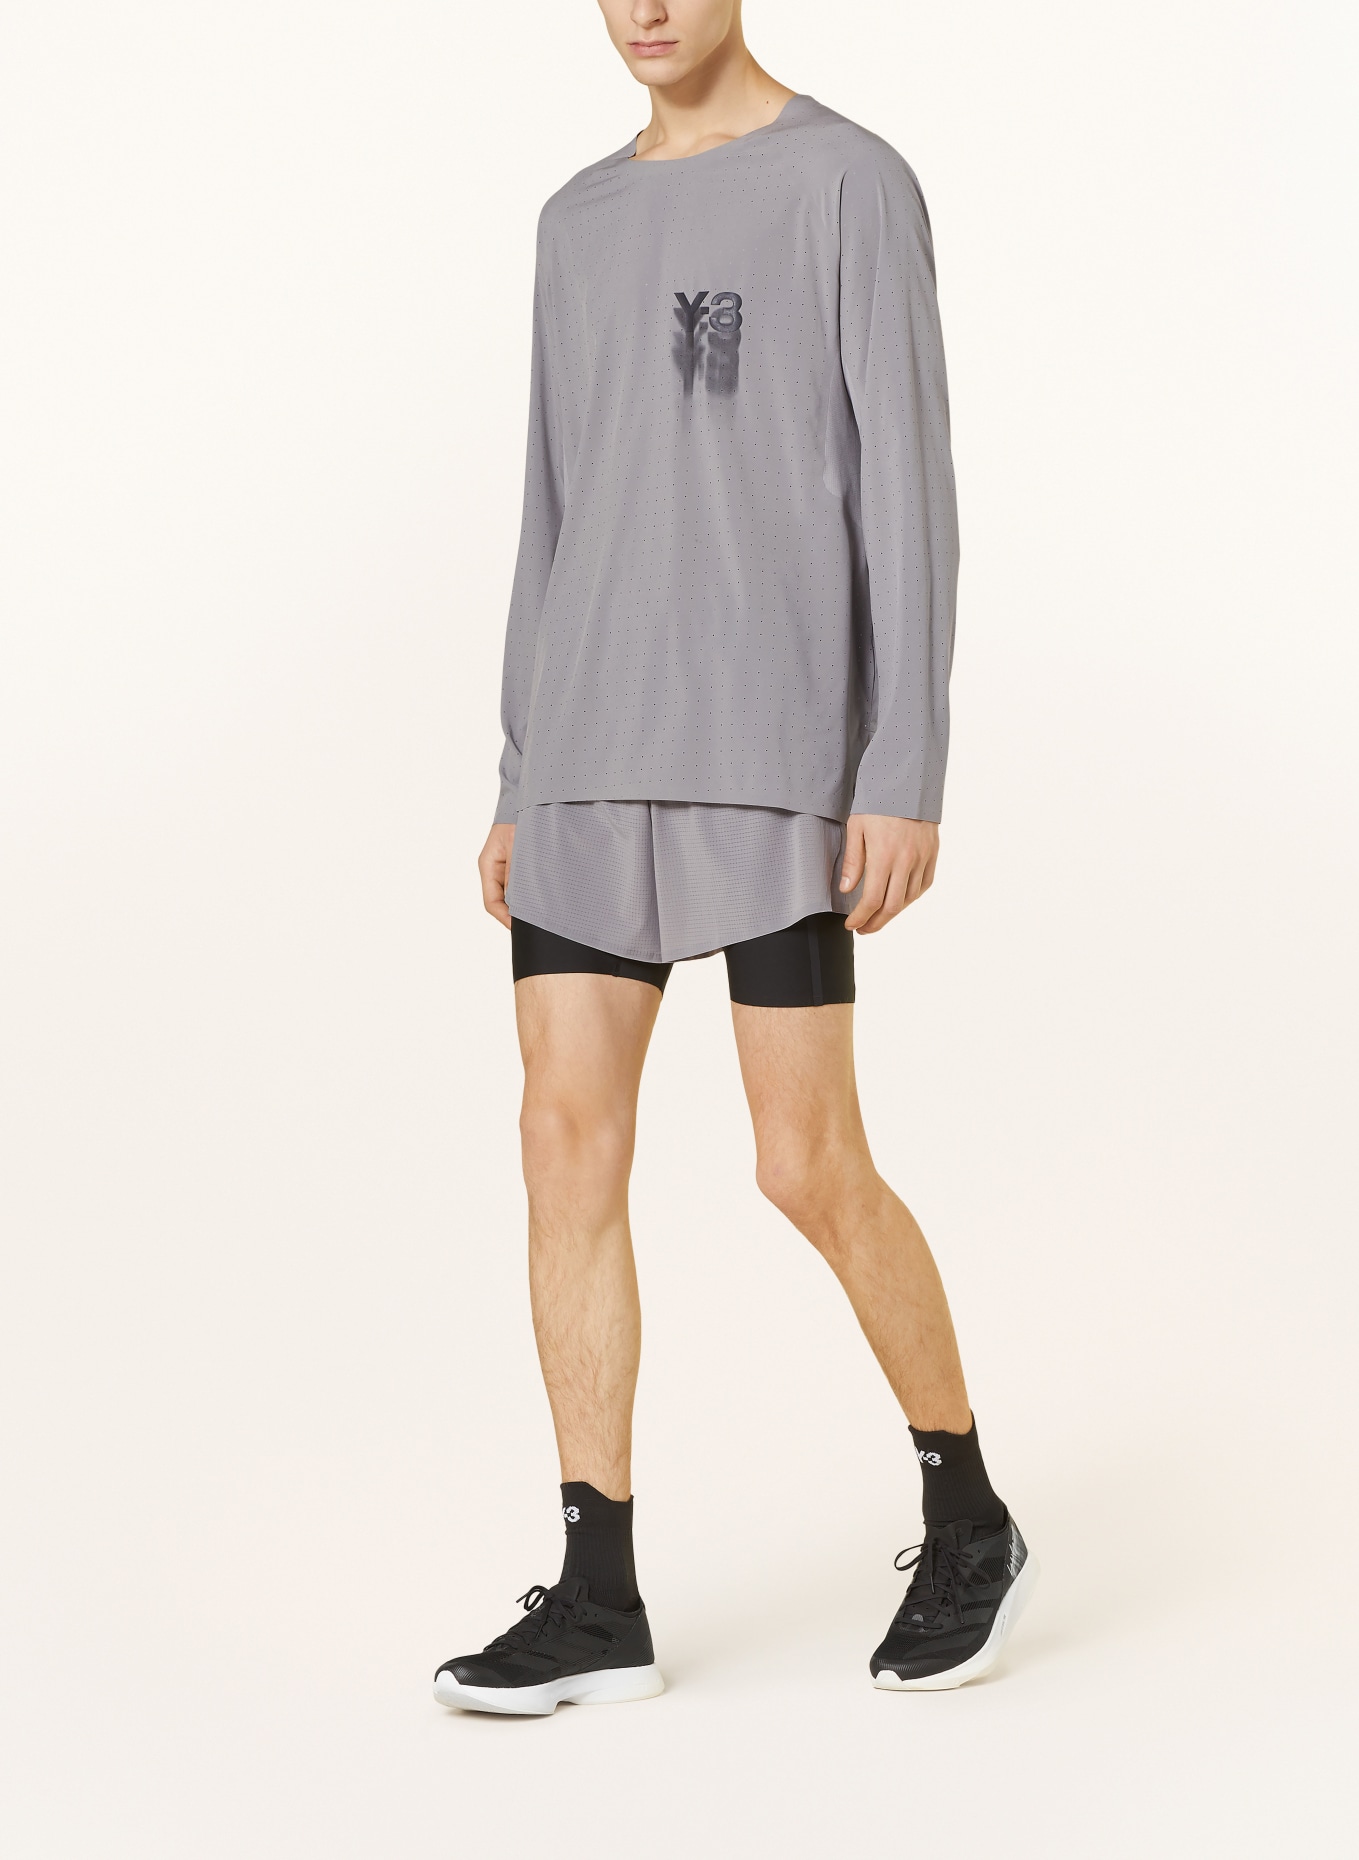 Y-3 Running shirt, Color: GRAY (Image 3)